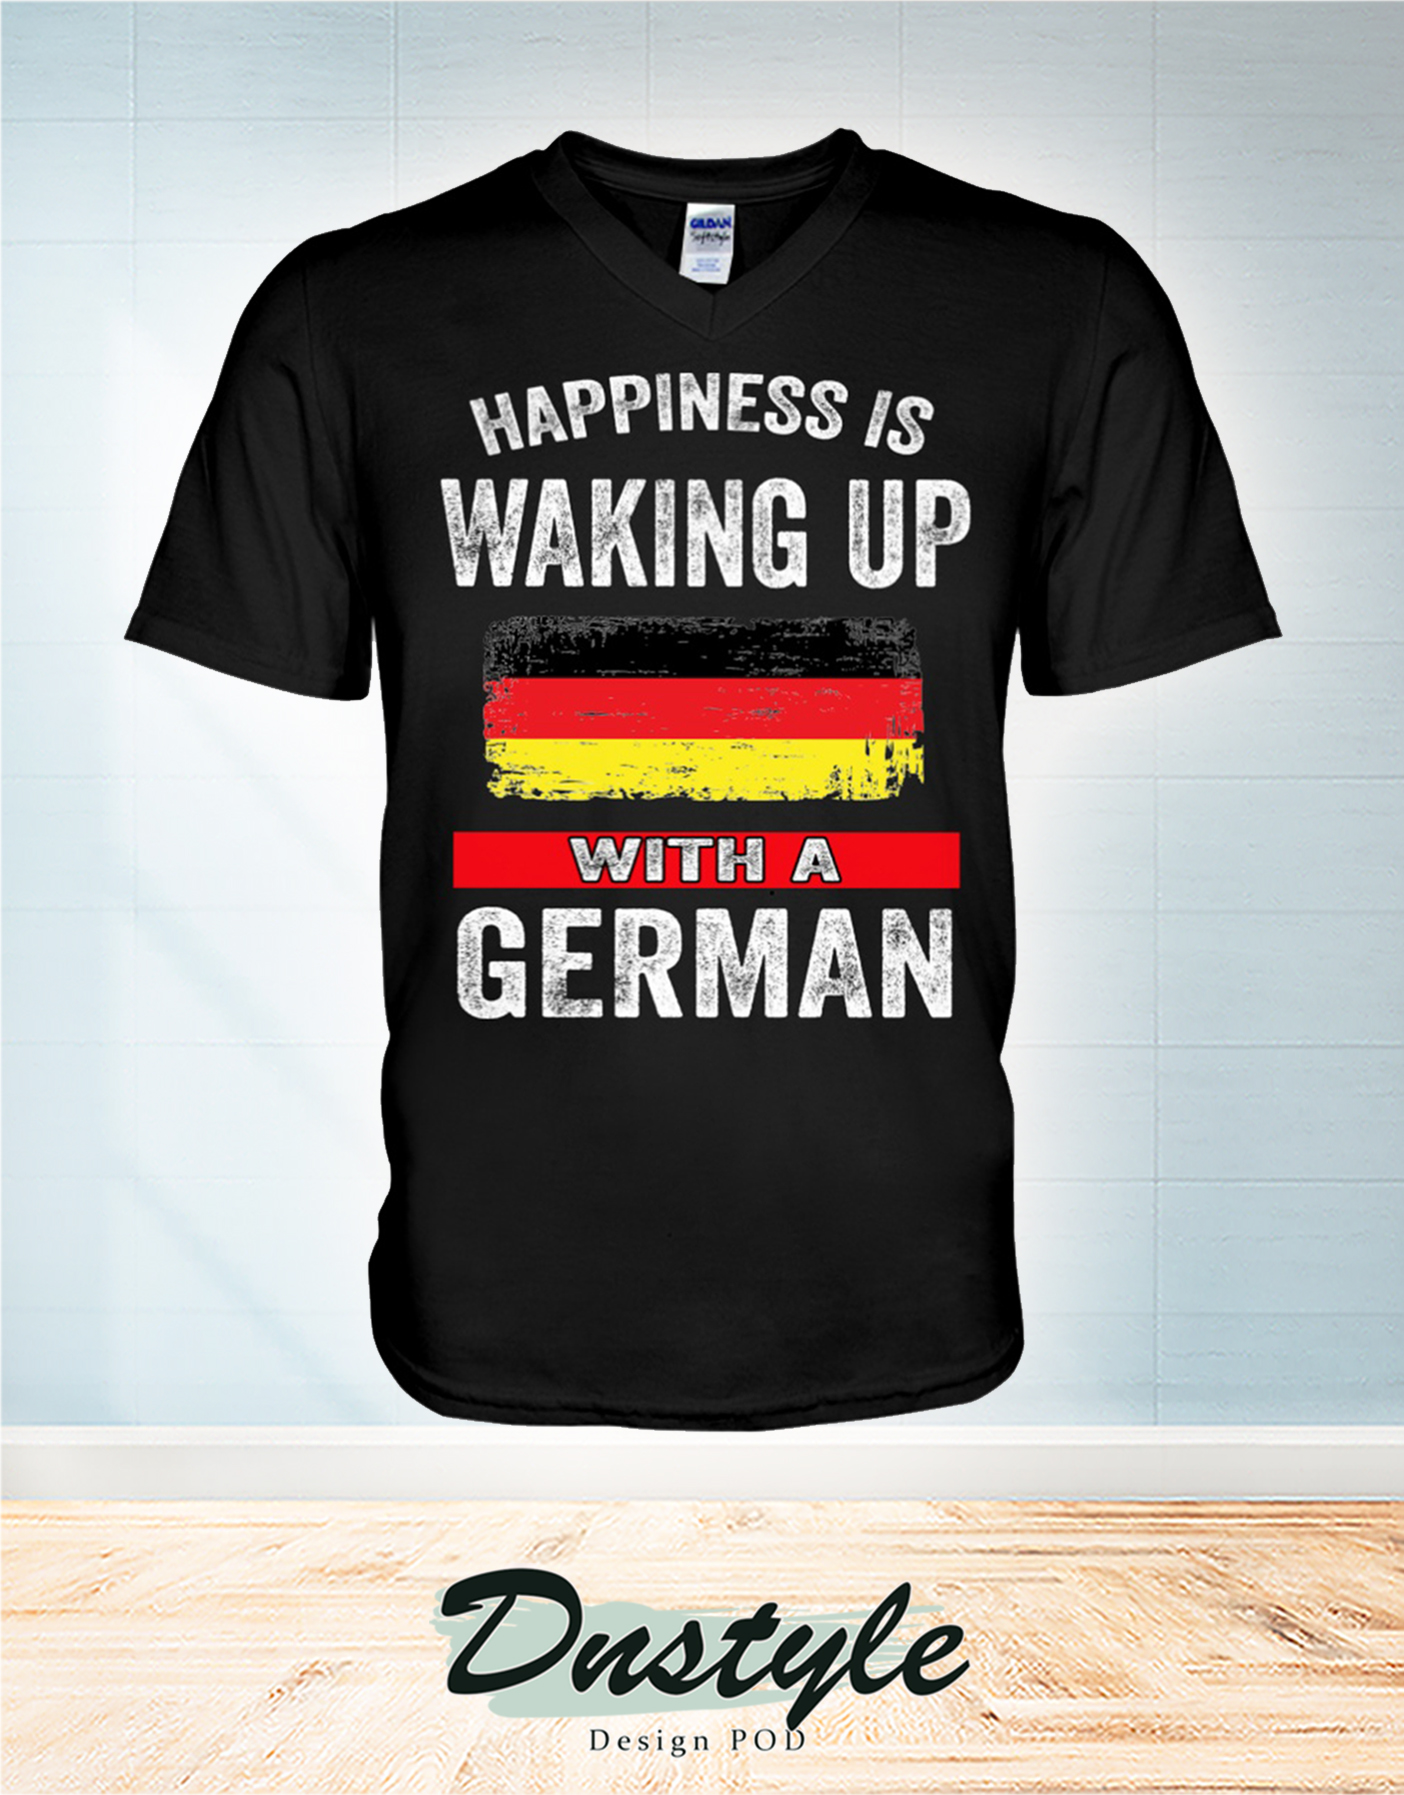 Happiness is waking up with a German v-neck